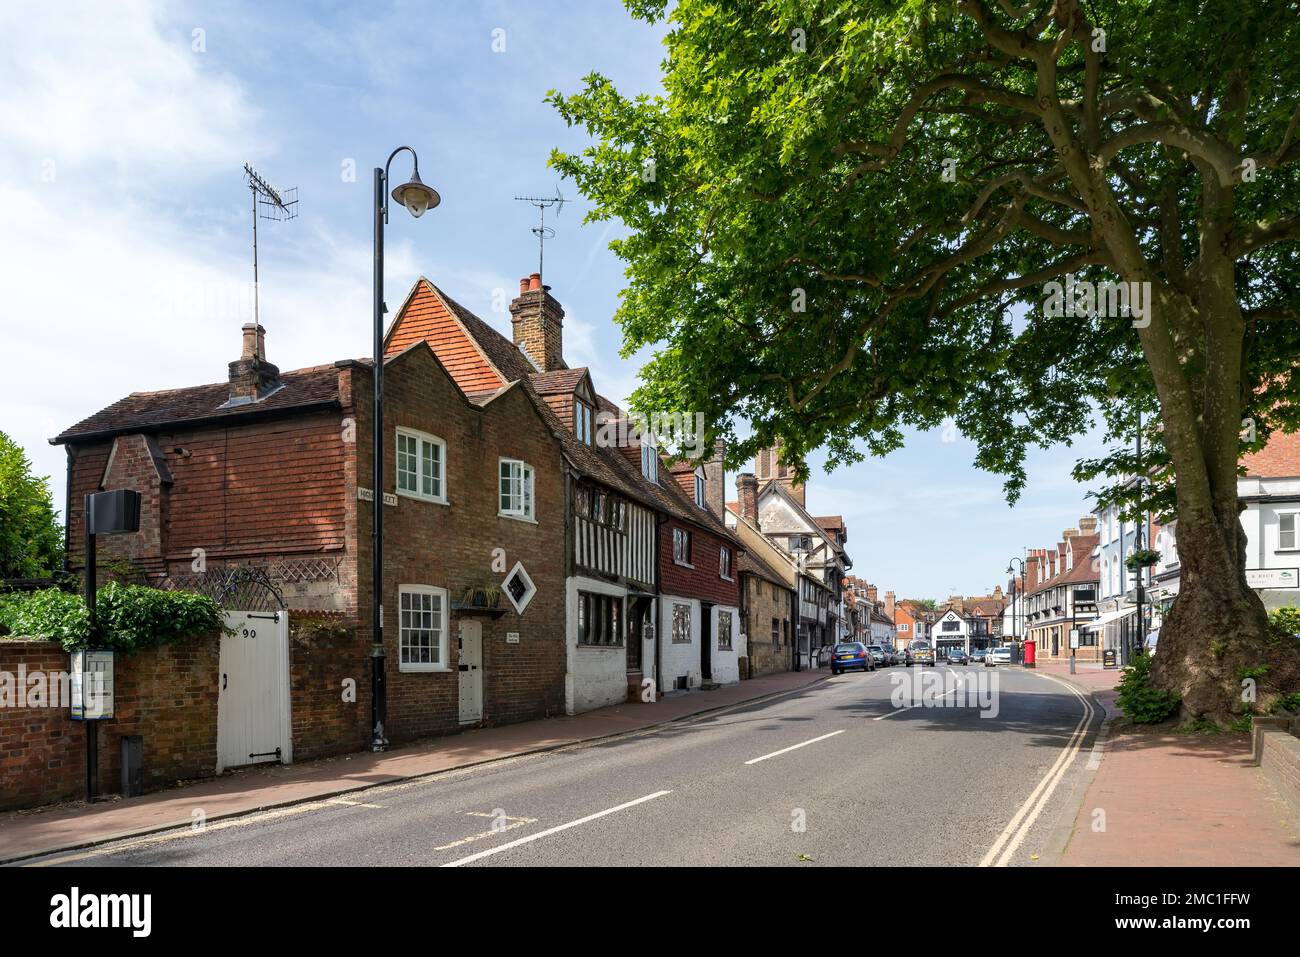 EAST GRINSTEAD, WEST SUSSEX, UK - JUNE 17 : View of the High Street in East Grinstead on June 17, 2022 Stock Photo